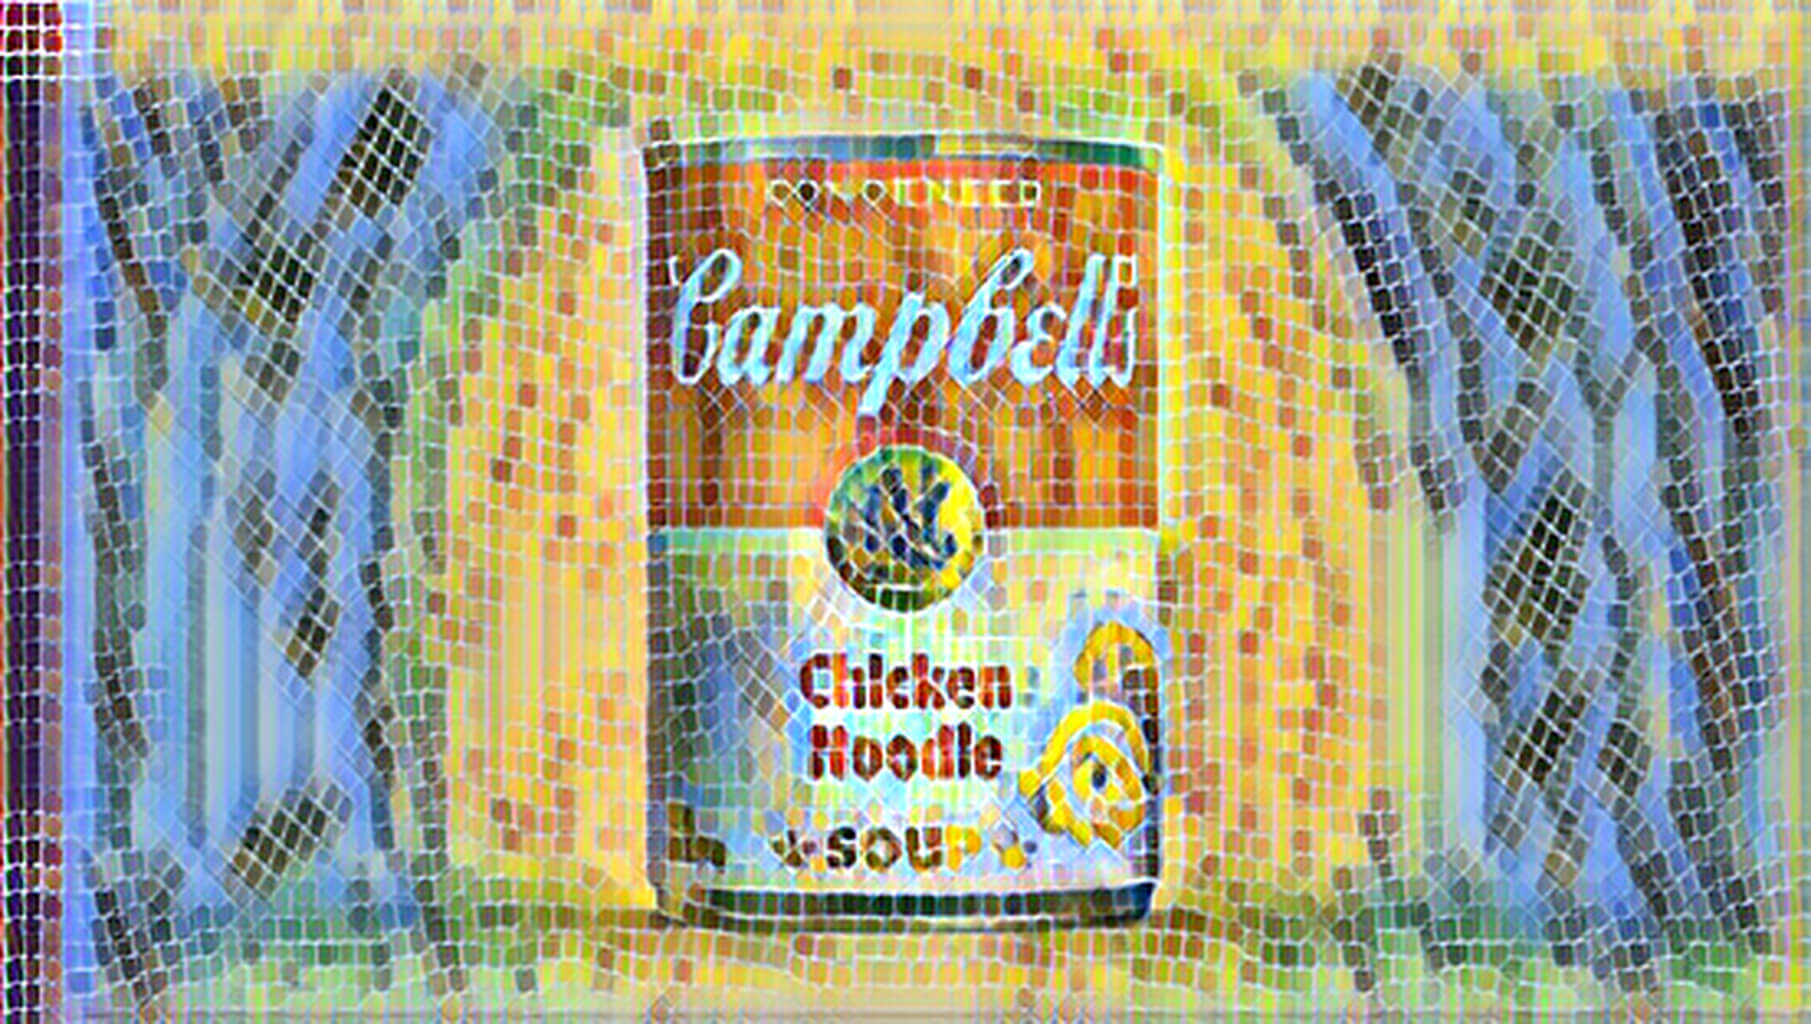     Campbell Soup Co.